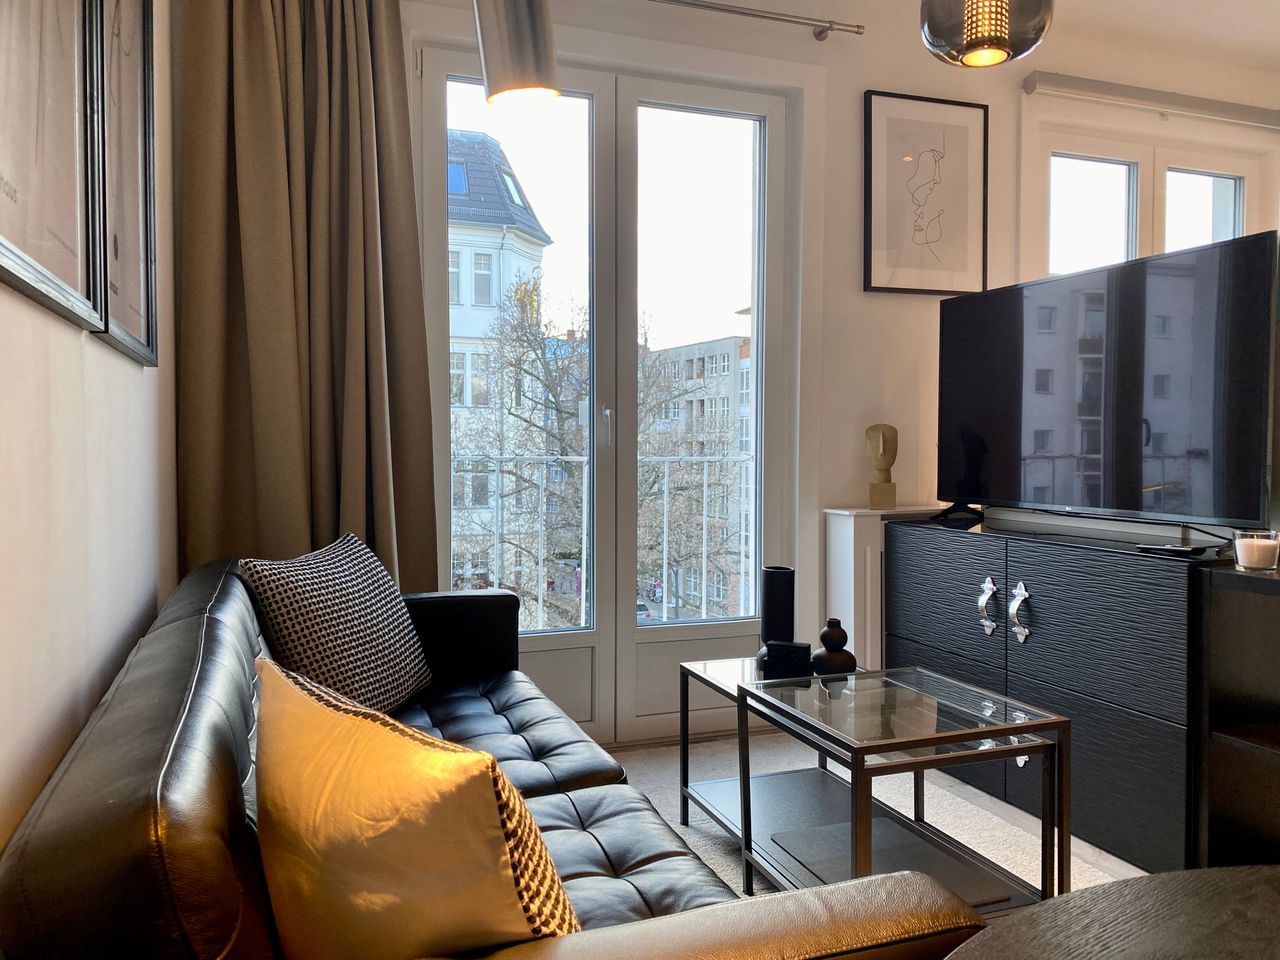 FURNISHED APARTMENT WITH CITY-WEST LIFESTYLE Schlüterstraße is one of the most sought-after residential addresses in Charlottenburg